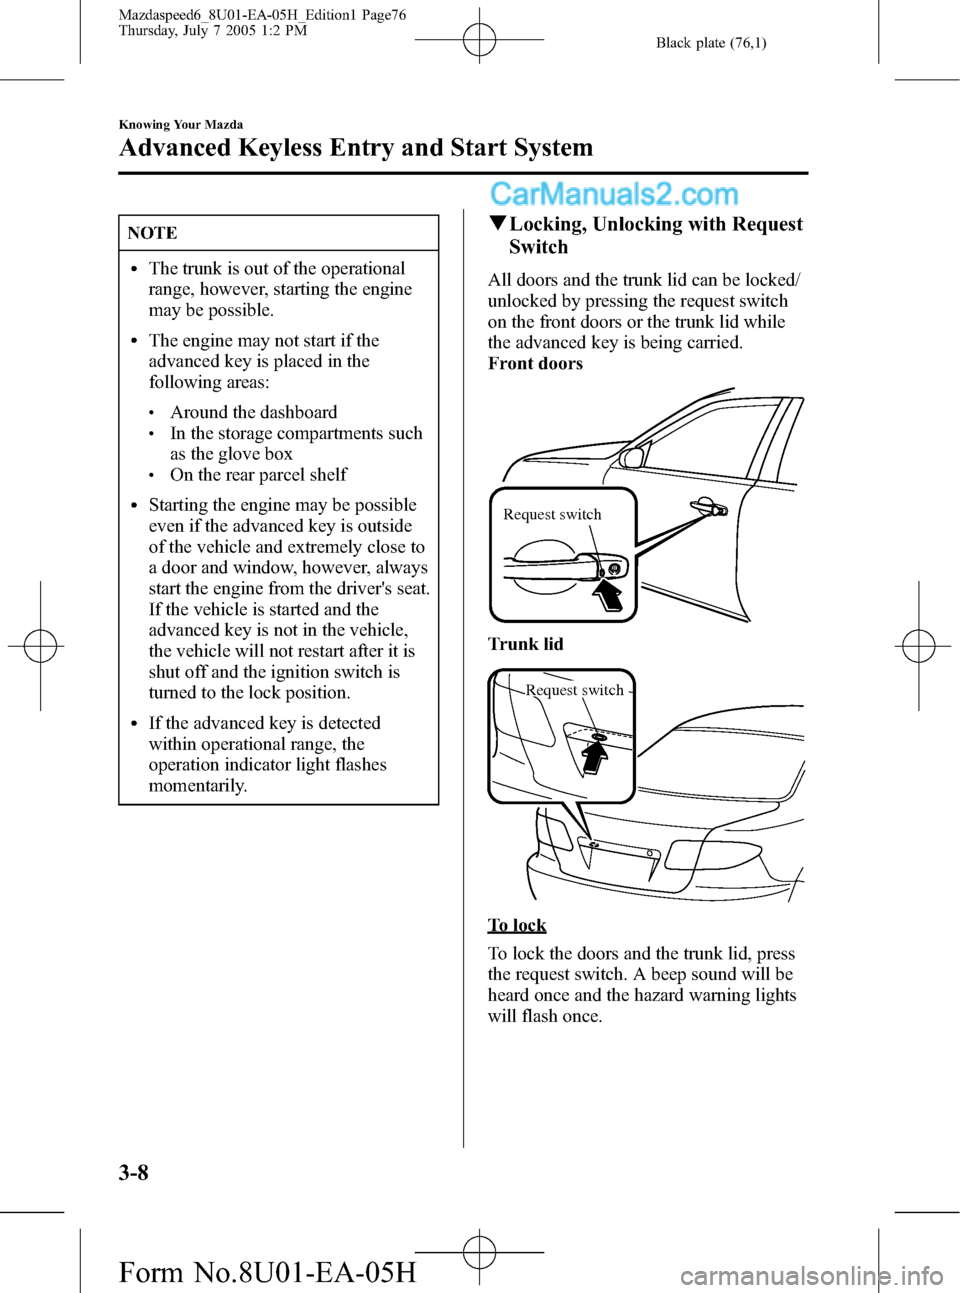 MAZDA MODEL MAZDASPEED 6 2006   (in English) Manual PDF Black plate (76,1)
NOTE
lThe trunk is out of the operational
range, however, starting the engine
may be possible.
lThe engine may not start if the
advanced key is placed in the
following areas:
lAroun